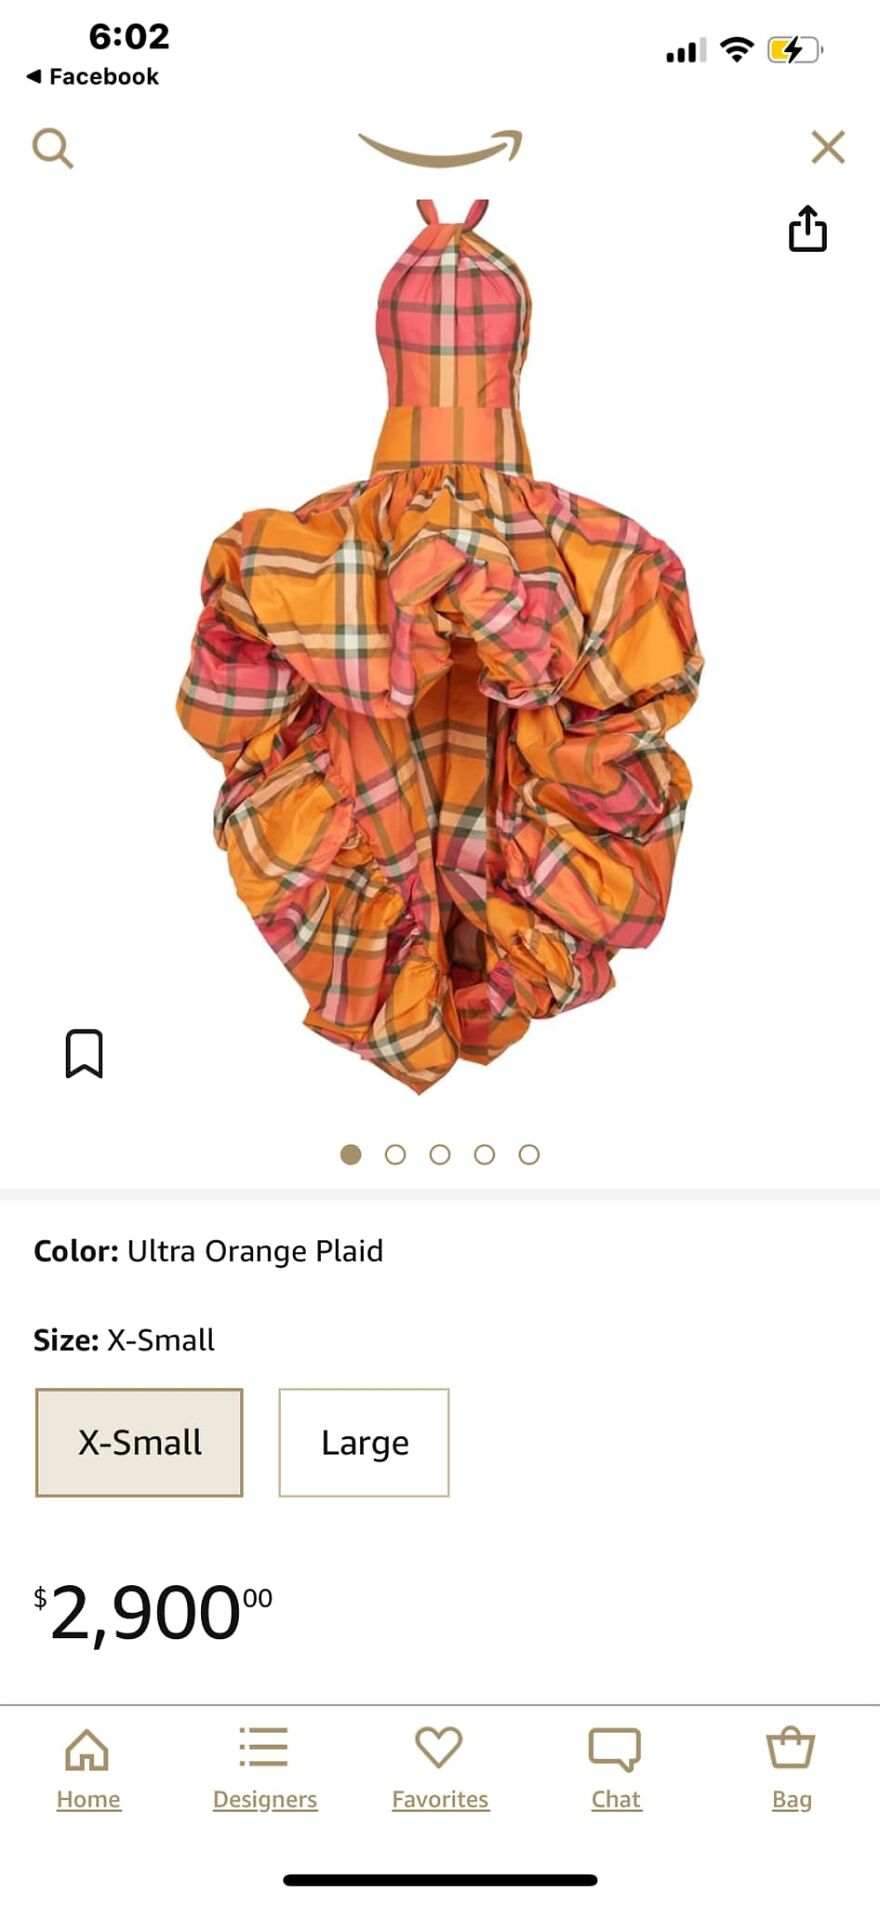 A Couple Of Things….i Really Need Amazon To Stop Advertising Things To Me That Are Trillion Dollarssss 😂…..i Also Thought This Was A Bonnet At First. Then Realized It Was Dress To My Horror. I Just…don’t Know What They Were Thinking Lmao